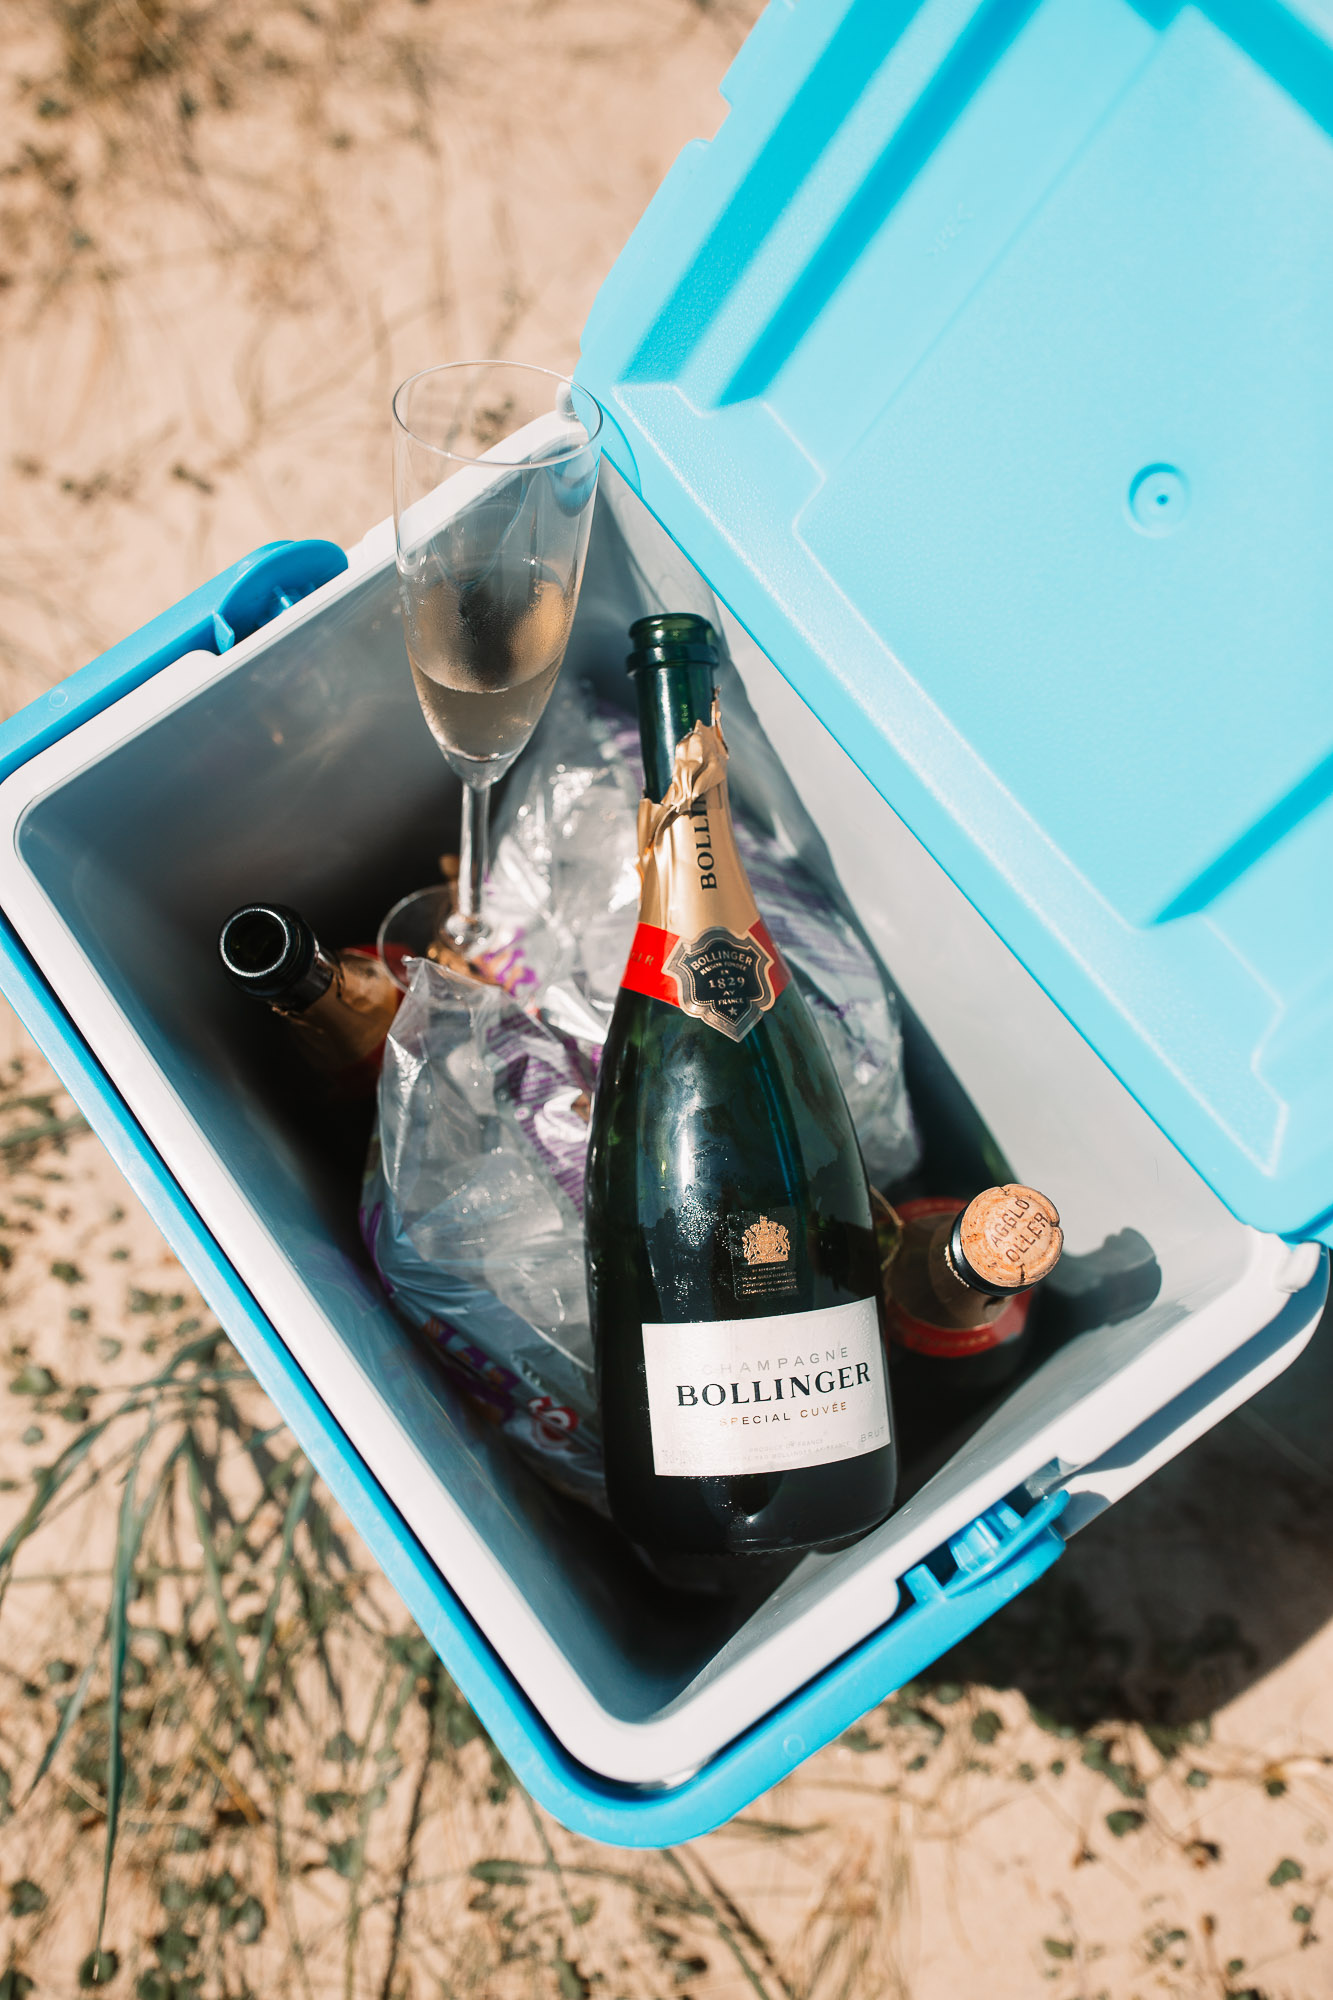 Bollinger champagne in a cool box on shell bay beach